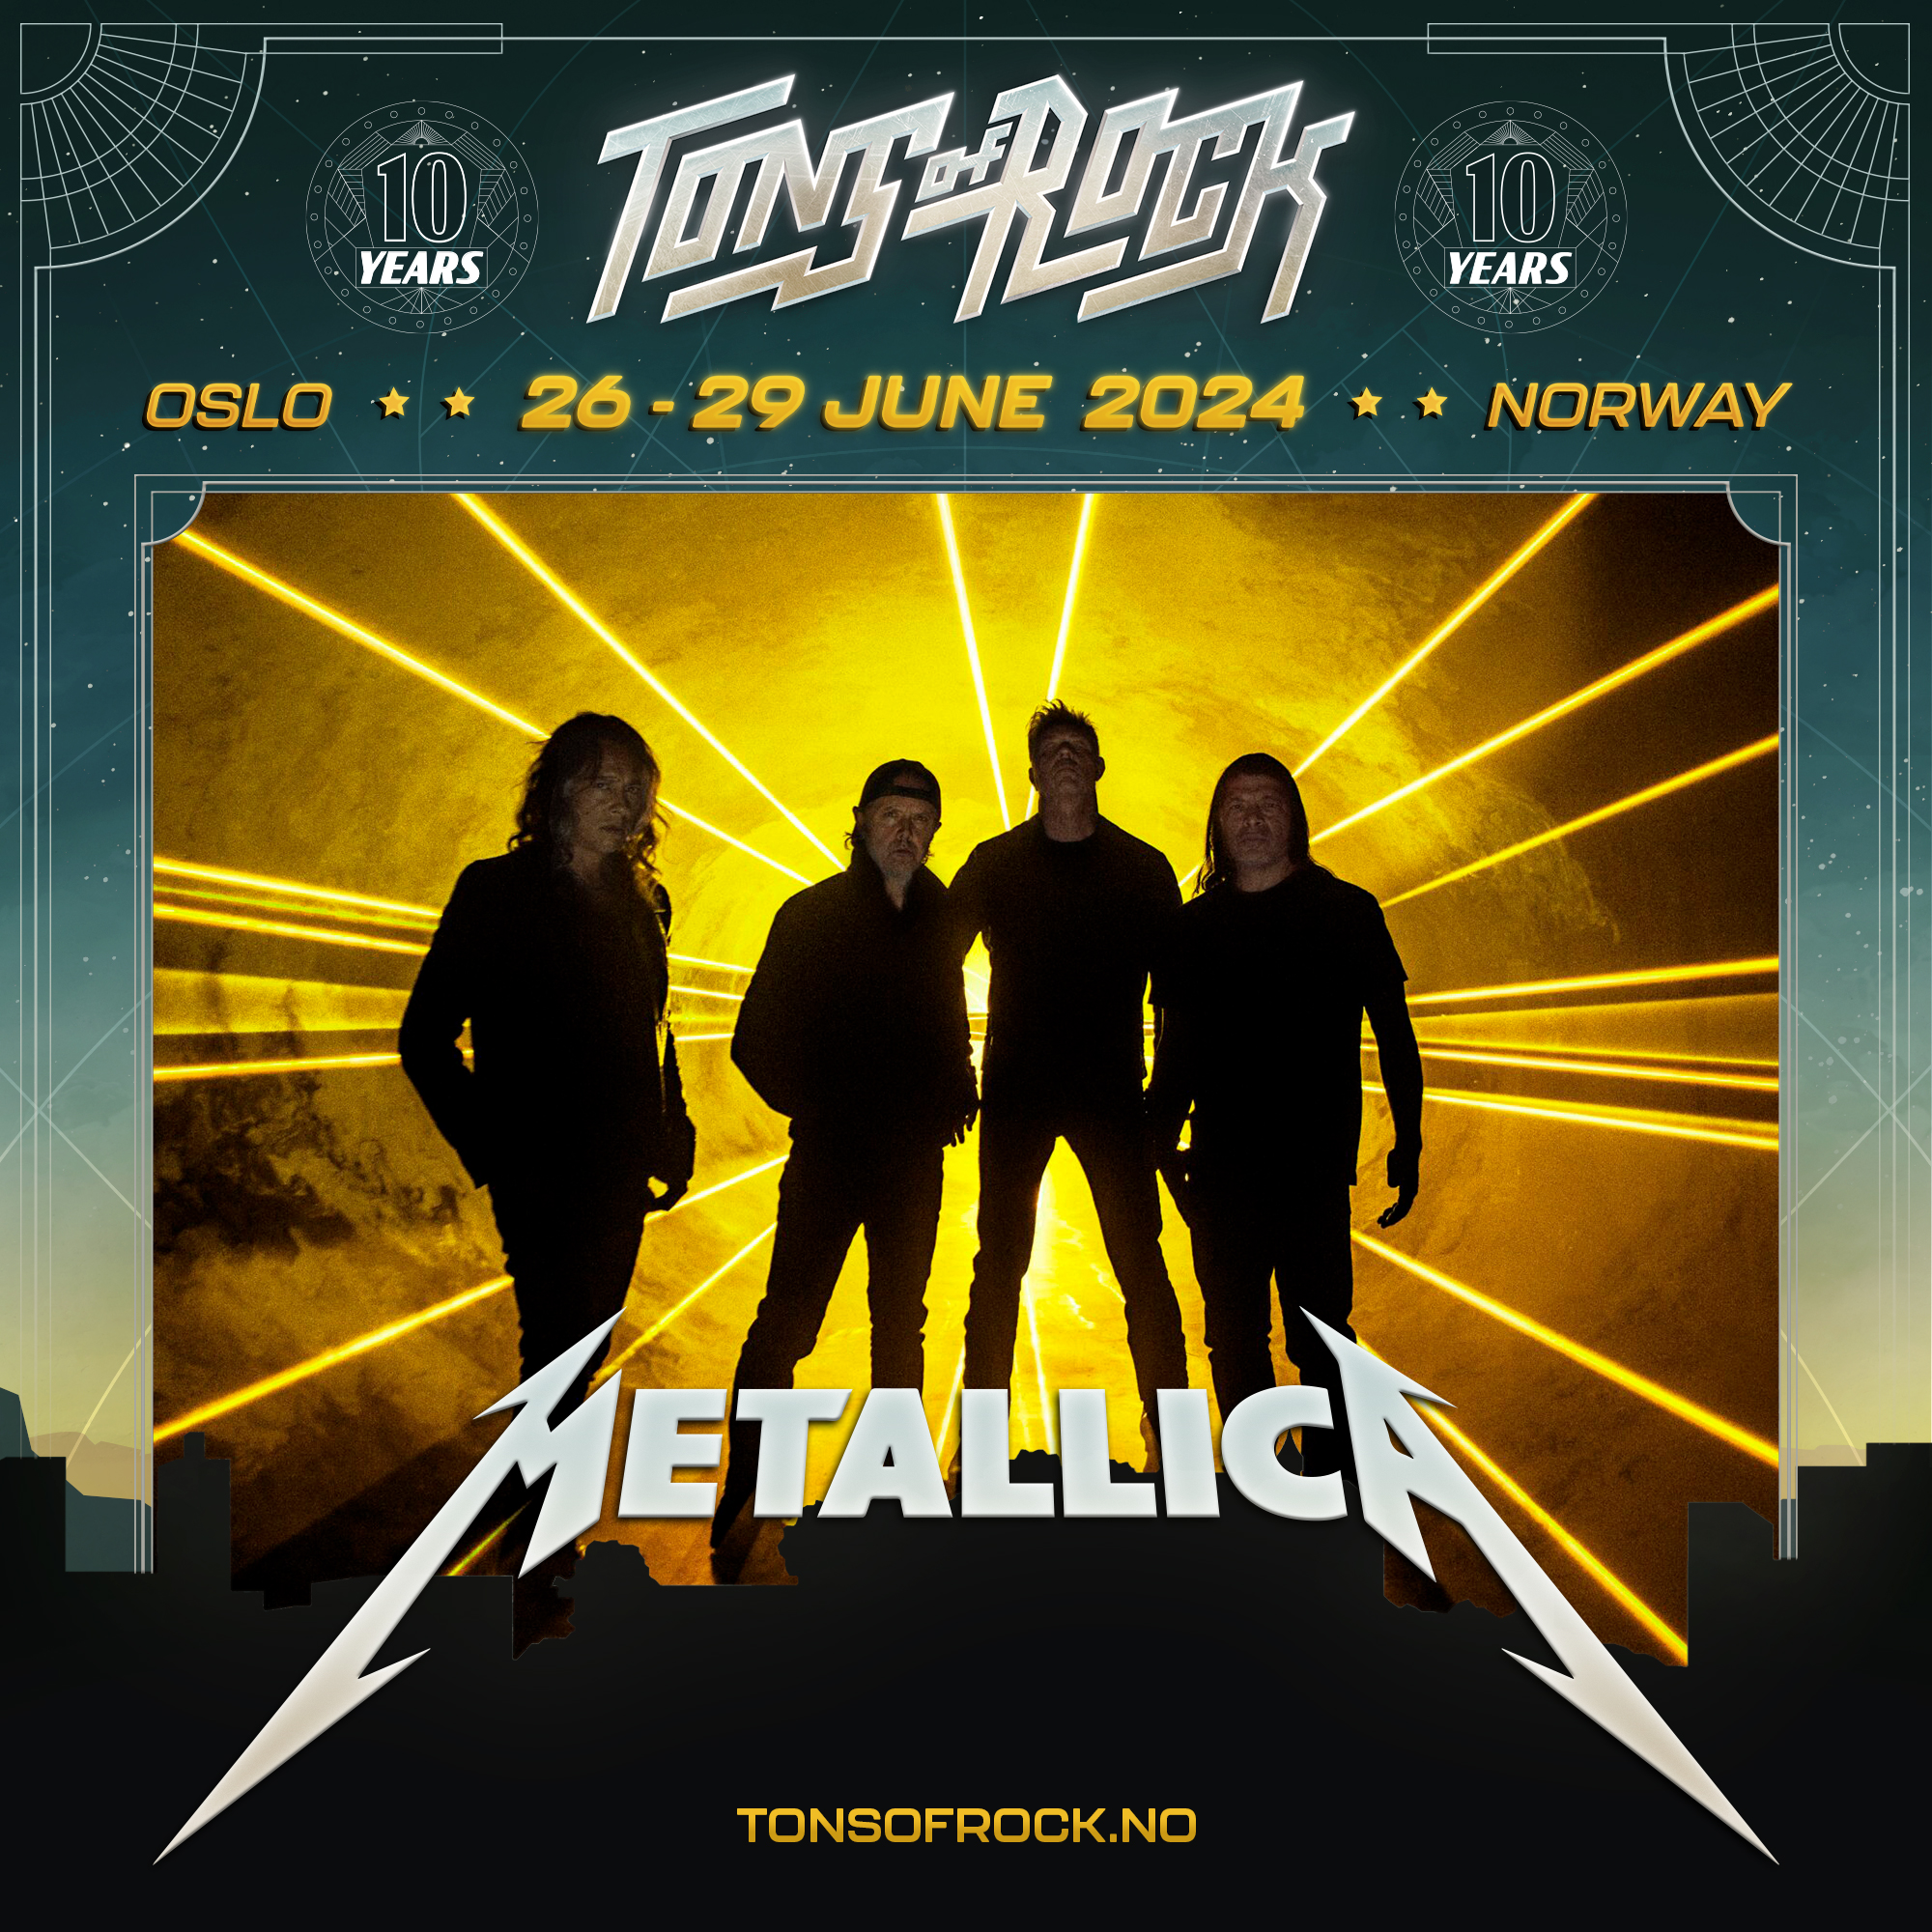 Metallica at the Tons of Rock 2024 Festival